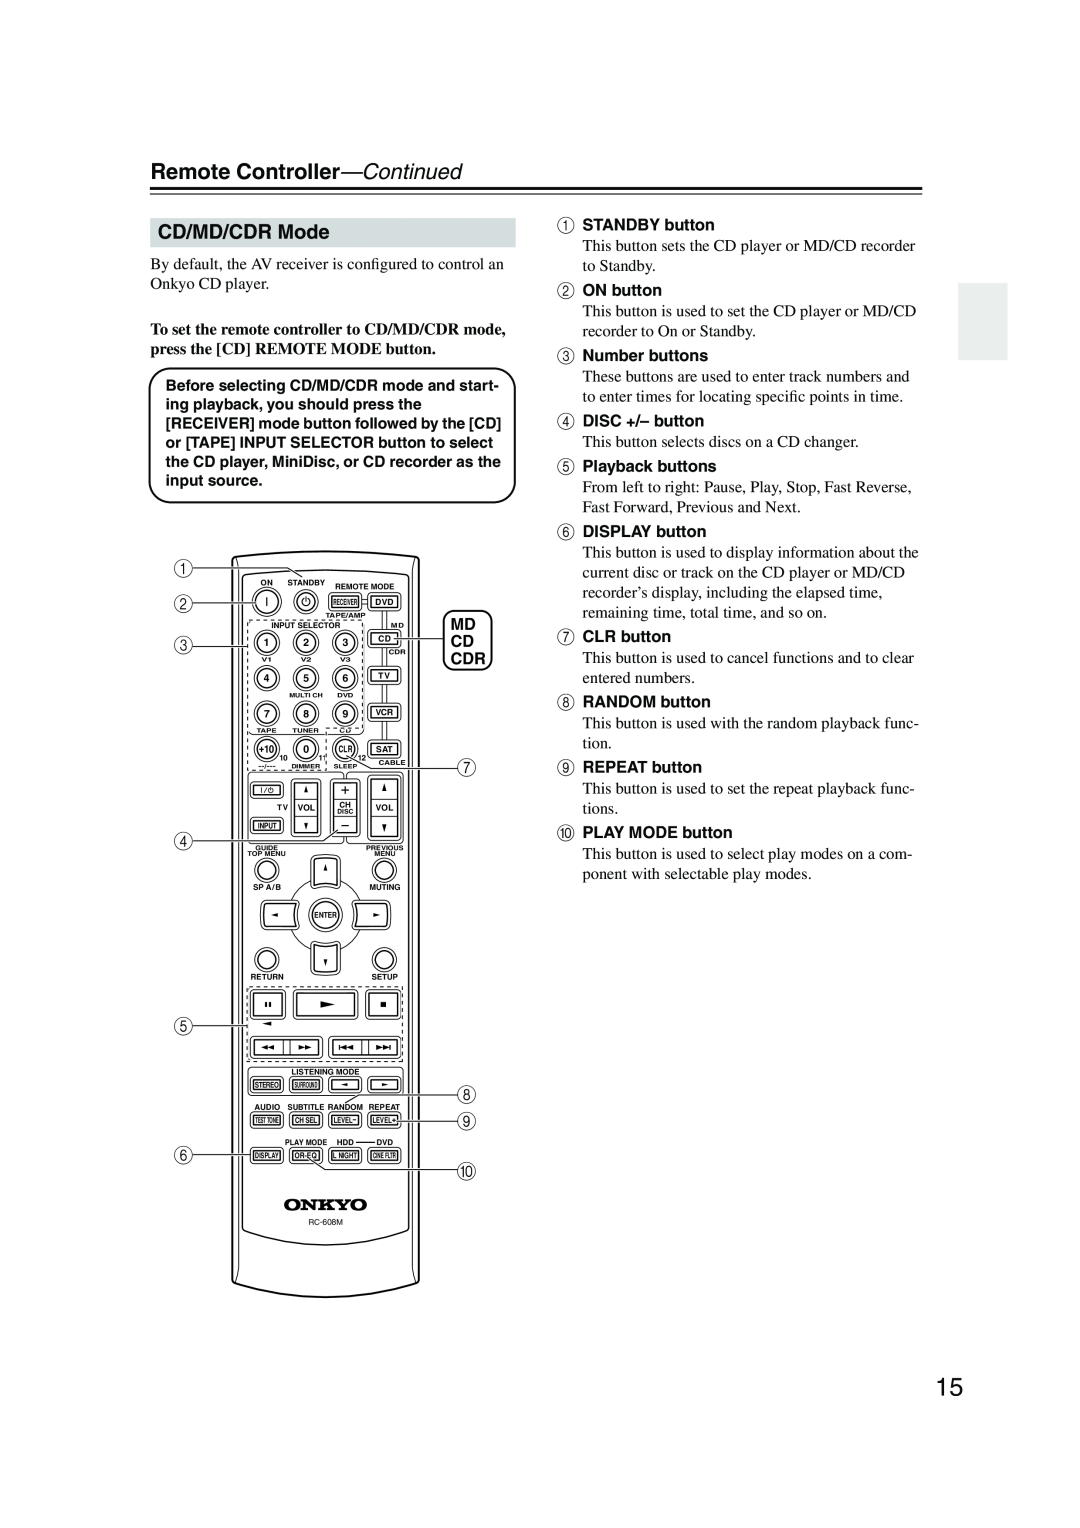 Onkyo HT-S780 instruction manual CD/MD/CDR Mode, Remote Controller-Continued, ponent with selectable play modes 